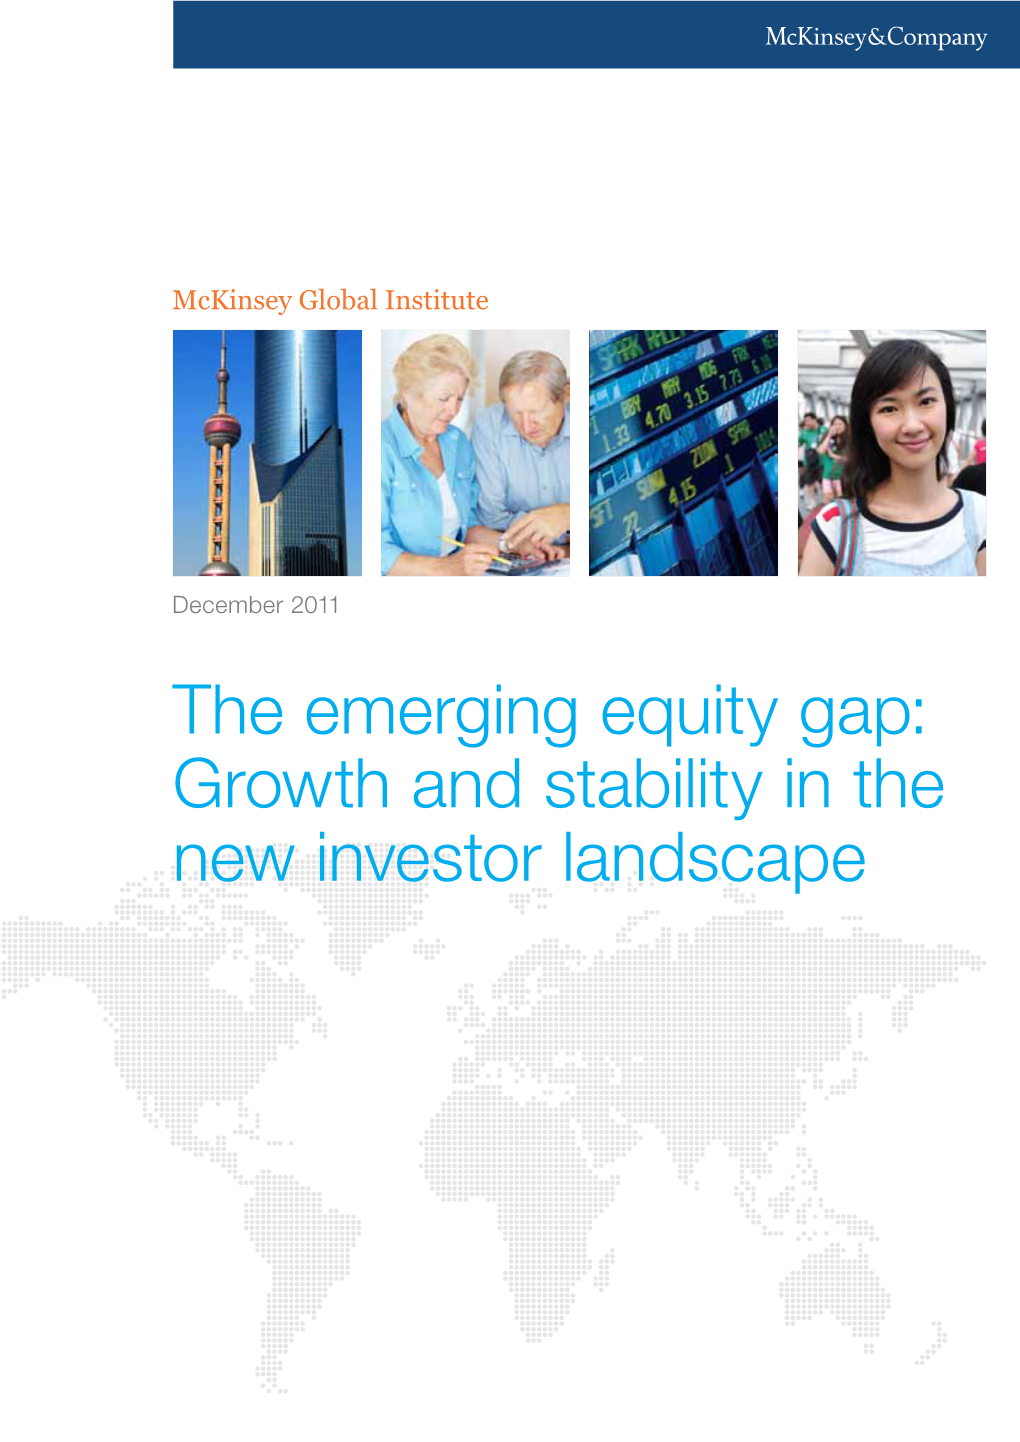 The Emerging Equity Gap: Growth and Stability in the New Investor New the Landscape in Stability and Gap: Growth Equity Emerging The